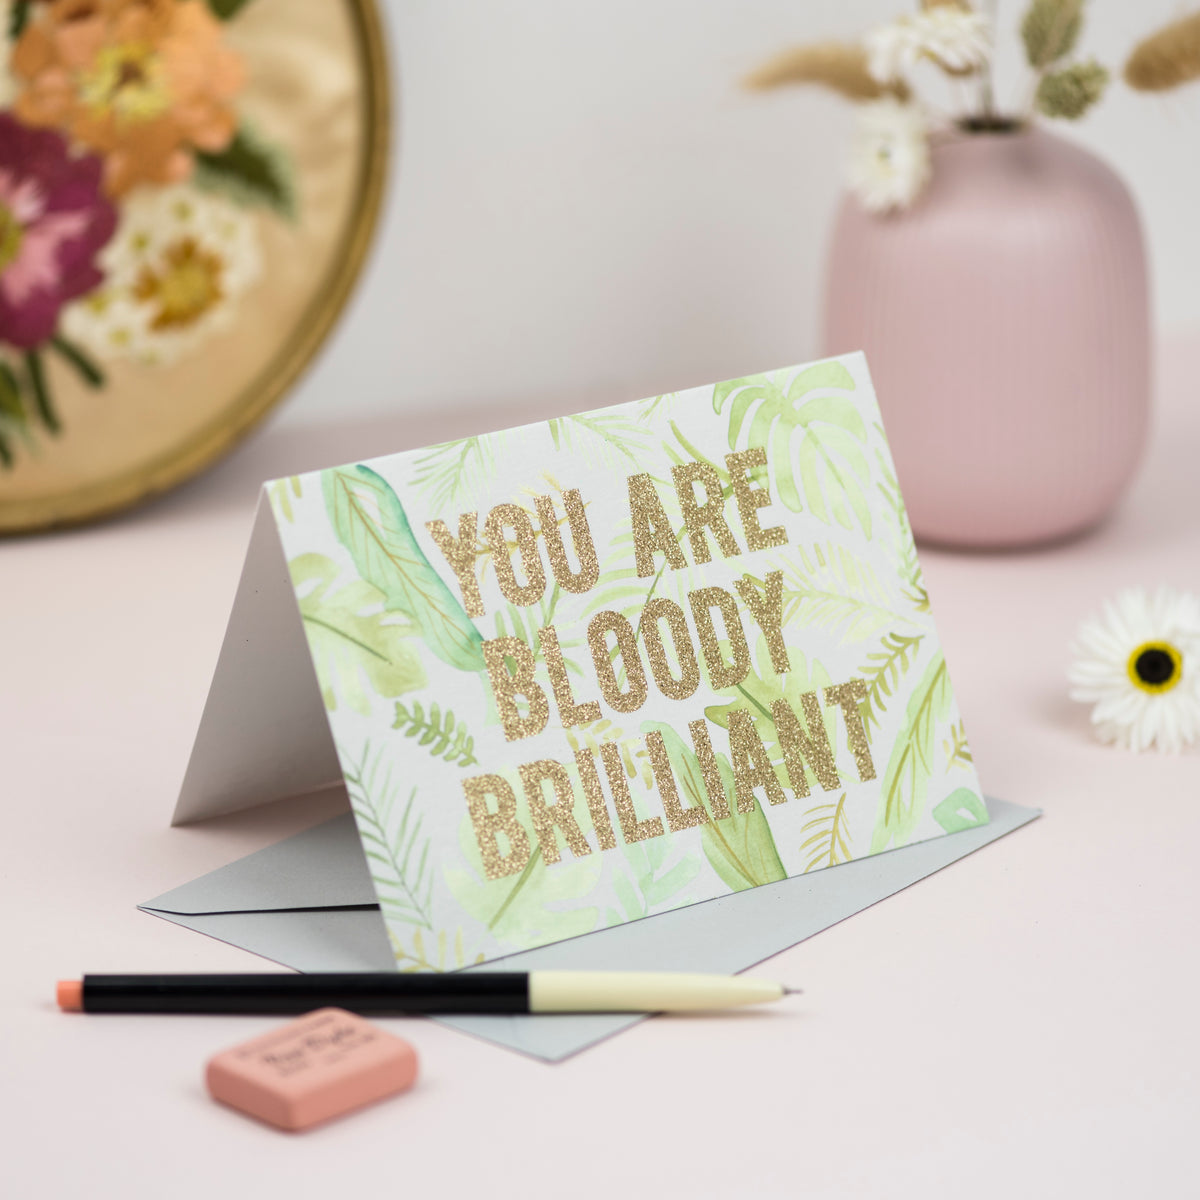 'You Are Bloody Brilliant' Palm Greetings Card - Biodegradable Glitter